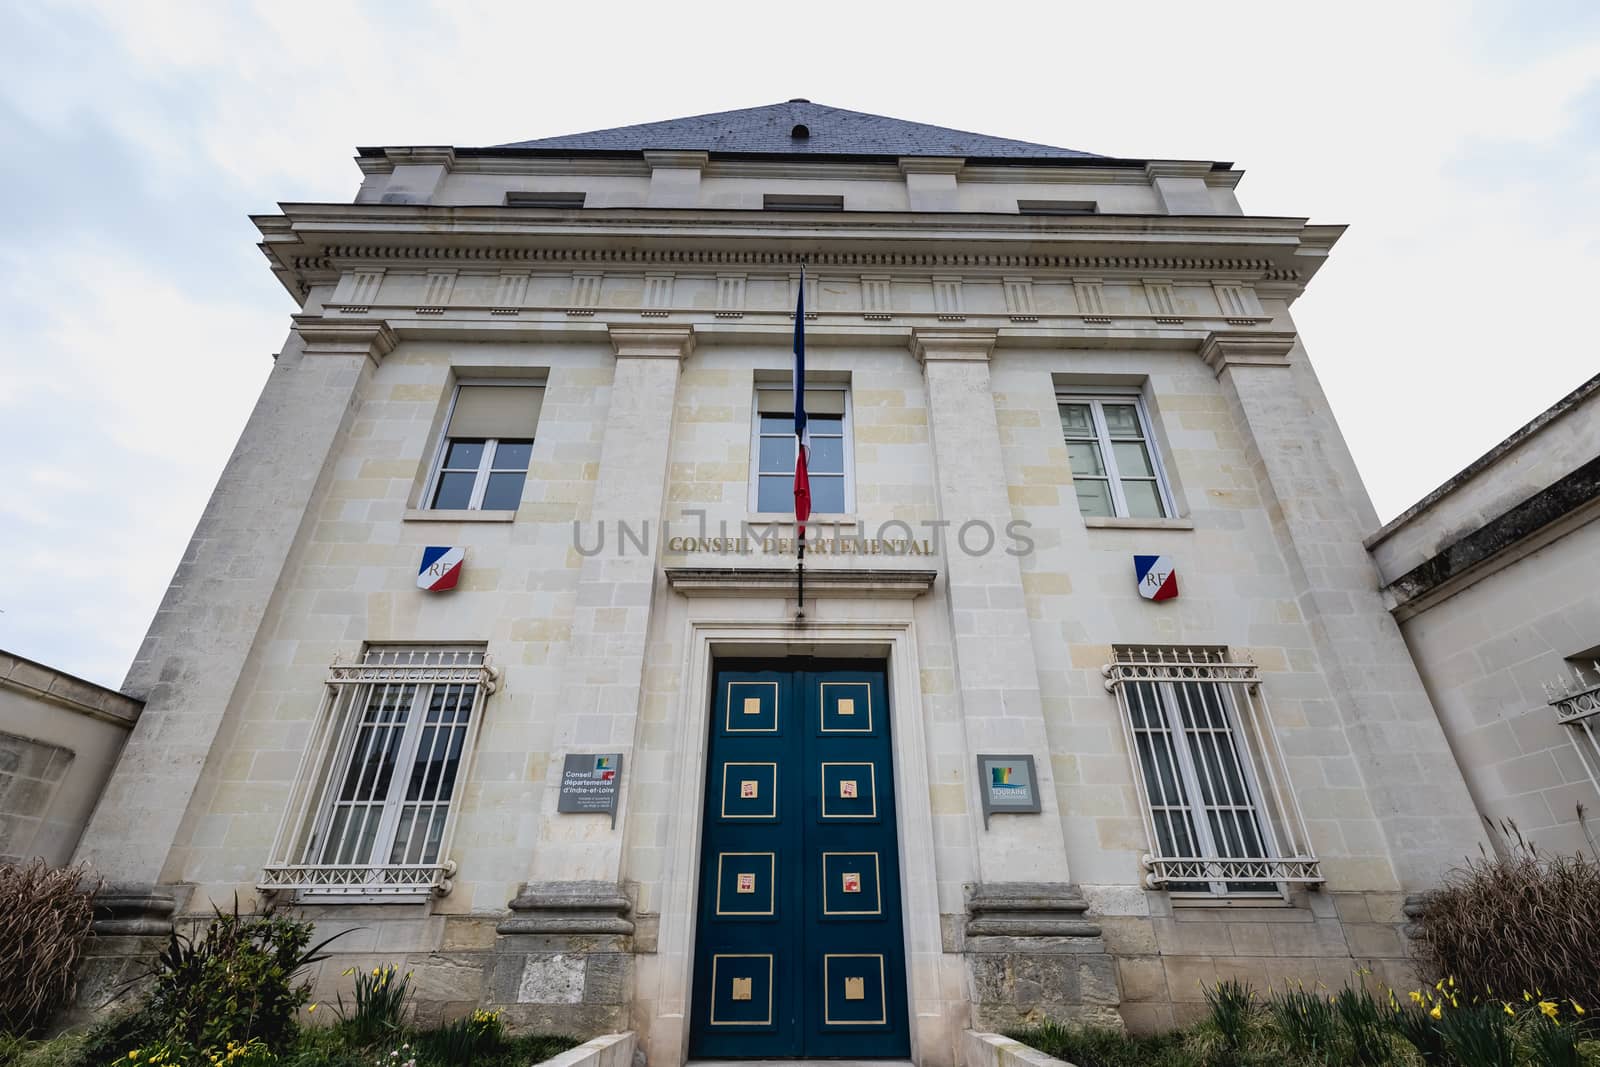 Tours, France - February 8, 2020: architectural detail of the Departmental Council of Indre et Loire on a winter day